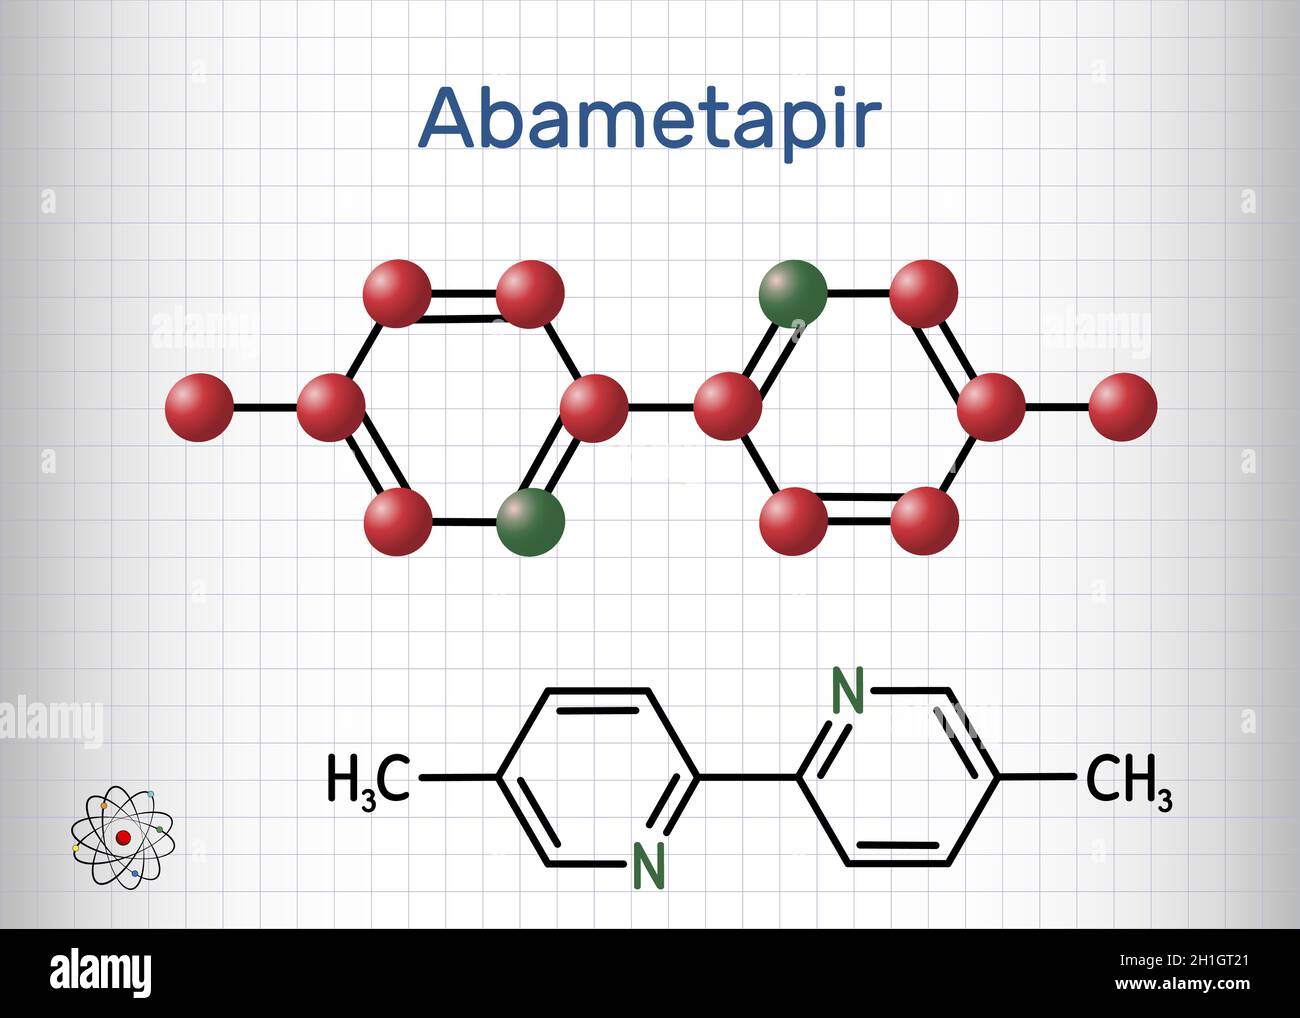 Abametapir molecule. It is used to treat infestations of head lice, pediculus capitis. Structural chemical formula and molecule model. Sheet of paper Stock Vector